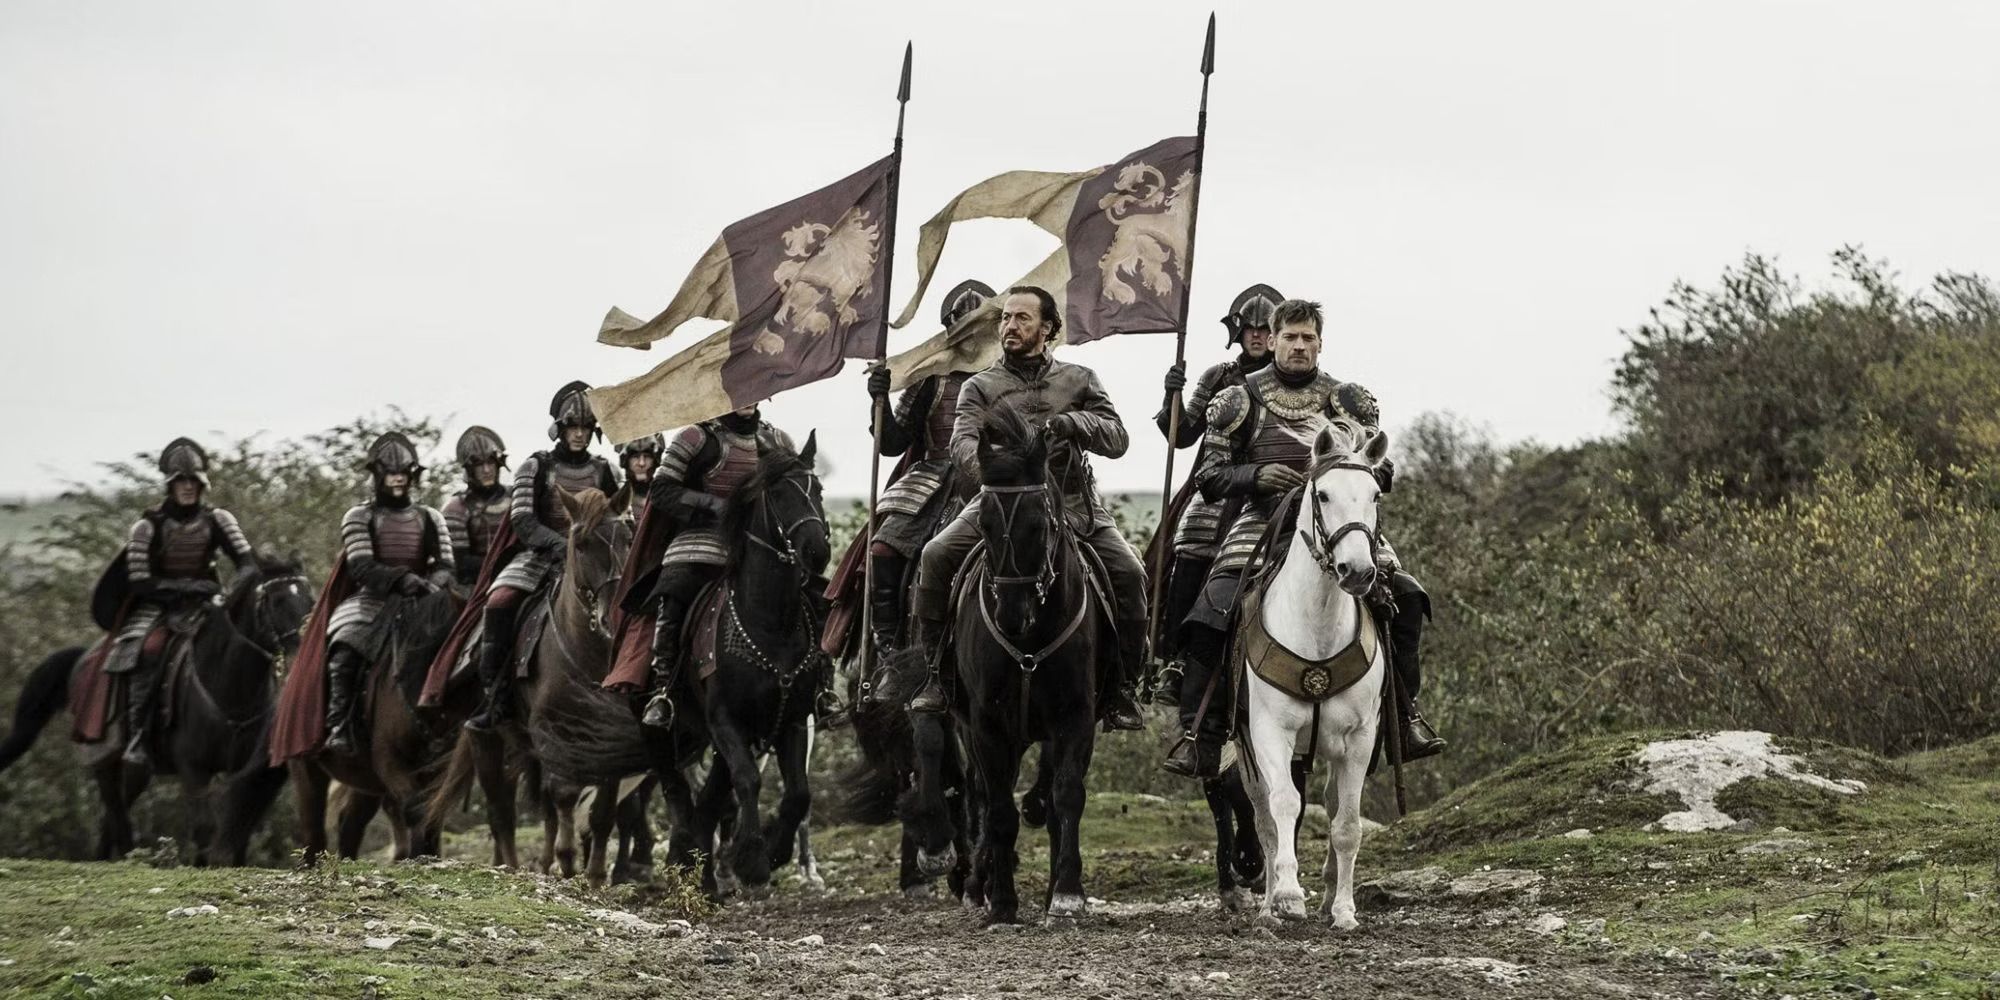 Jaime Lannister riding with Bronn and the Lannister army in 'Game of Thrones'